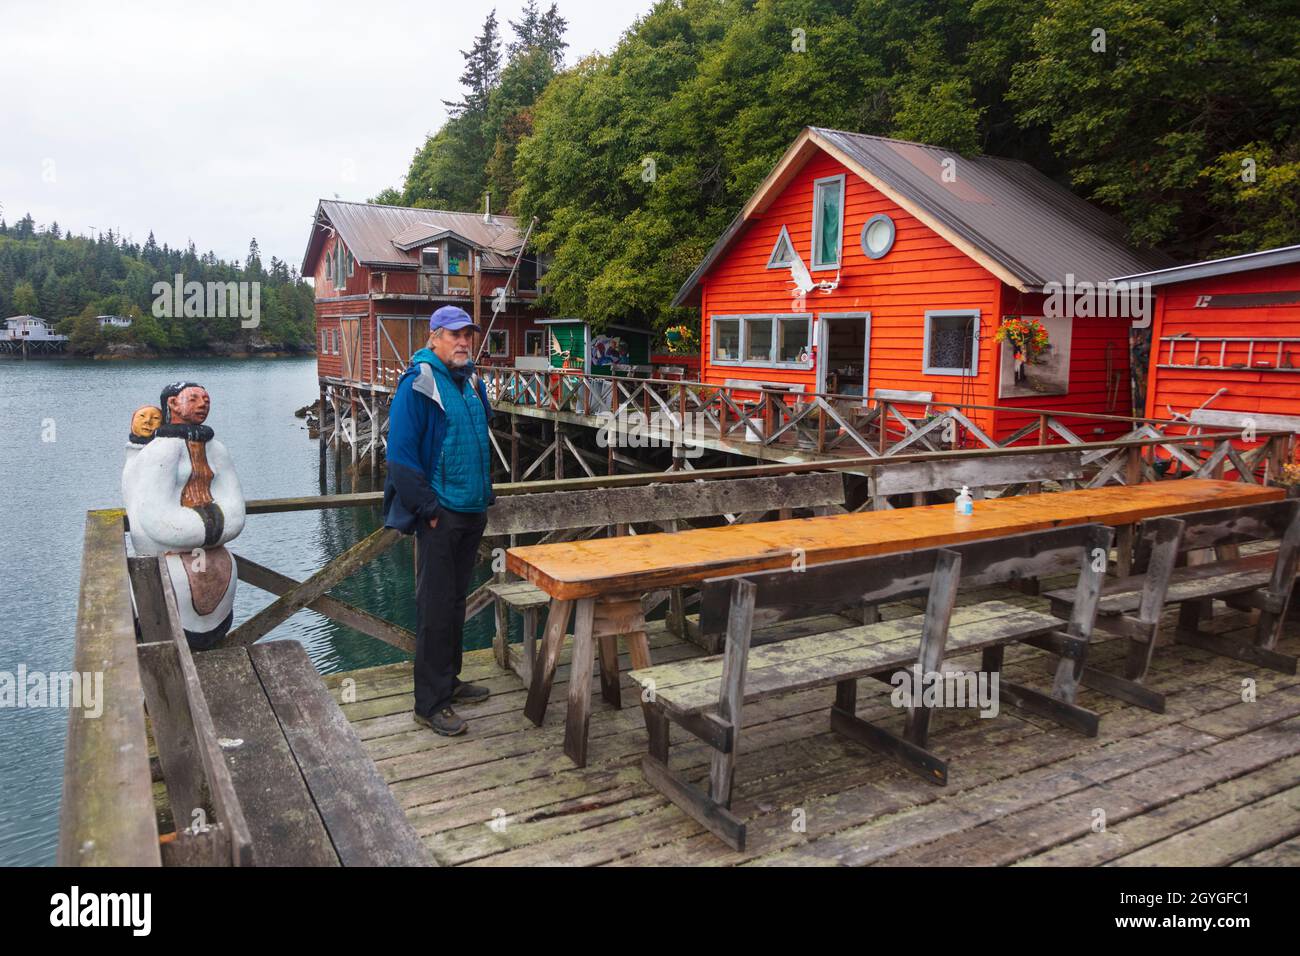 The SALTRY restaurant in HALIBUT COVE is reached by a 1 hour boat ride from HOMER, ALASKA. Stock Photo